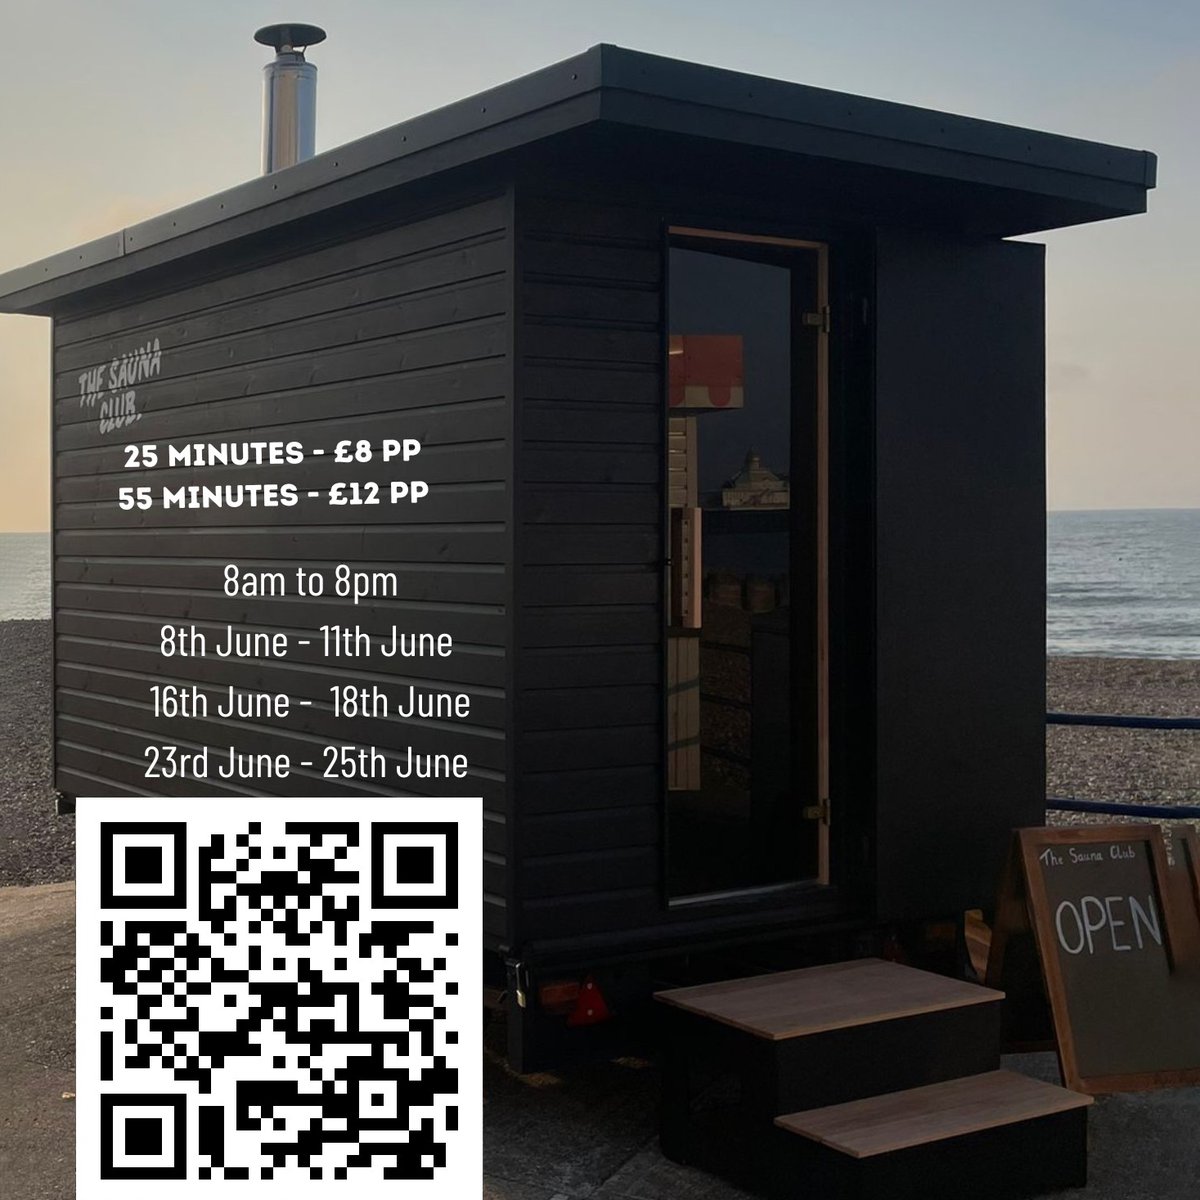 This is your last weekend to visit our friends The Sauna Club in Eastbourne, opposite the Port Hotel on the seafront. Sweat away your troubles with their wood-fired sauna, then cool off in the plunge pool or take dip in the sea. Book now at zurl.co/lP6g